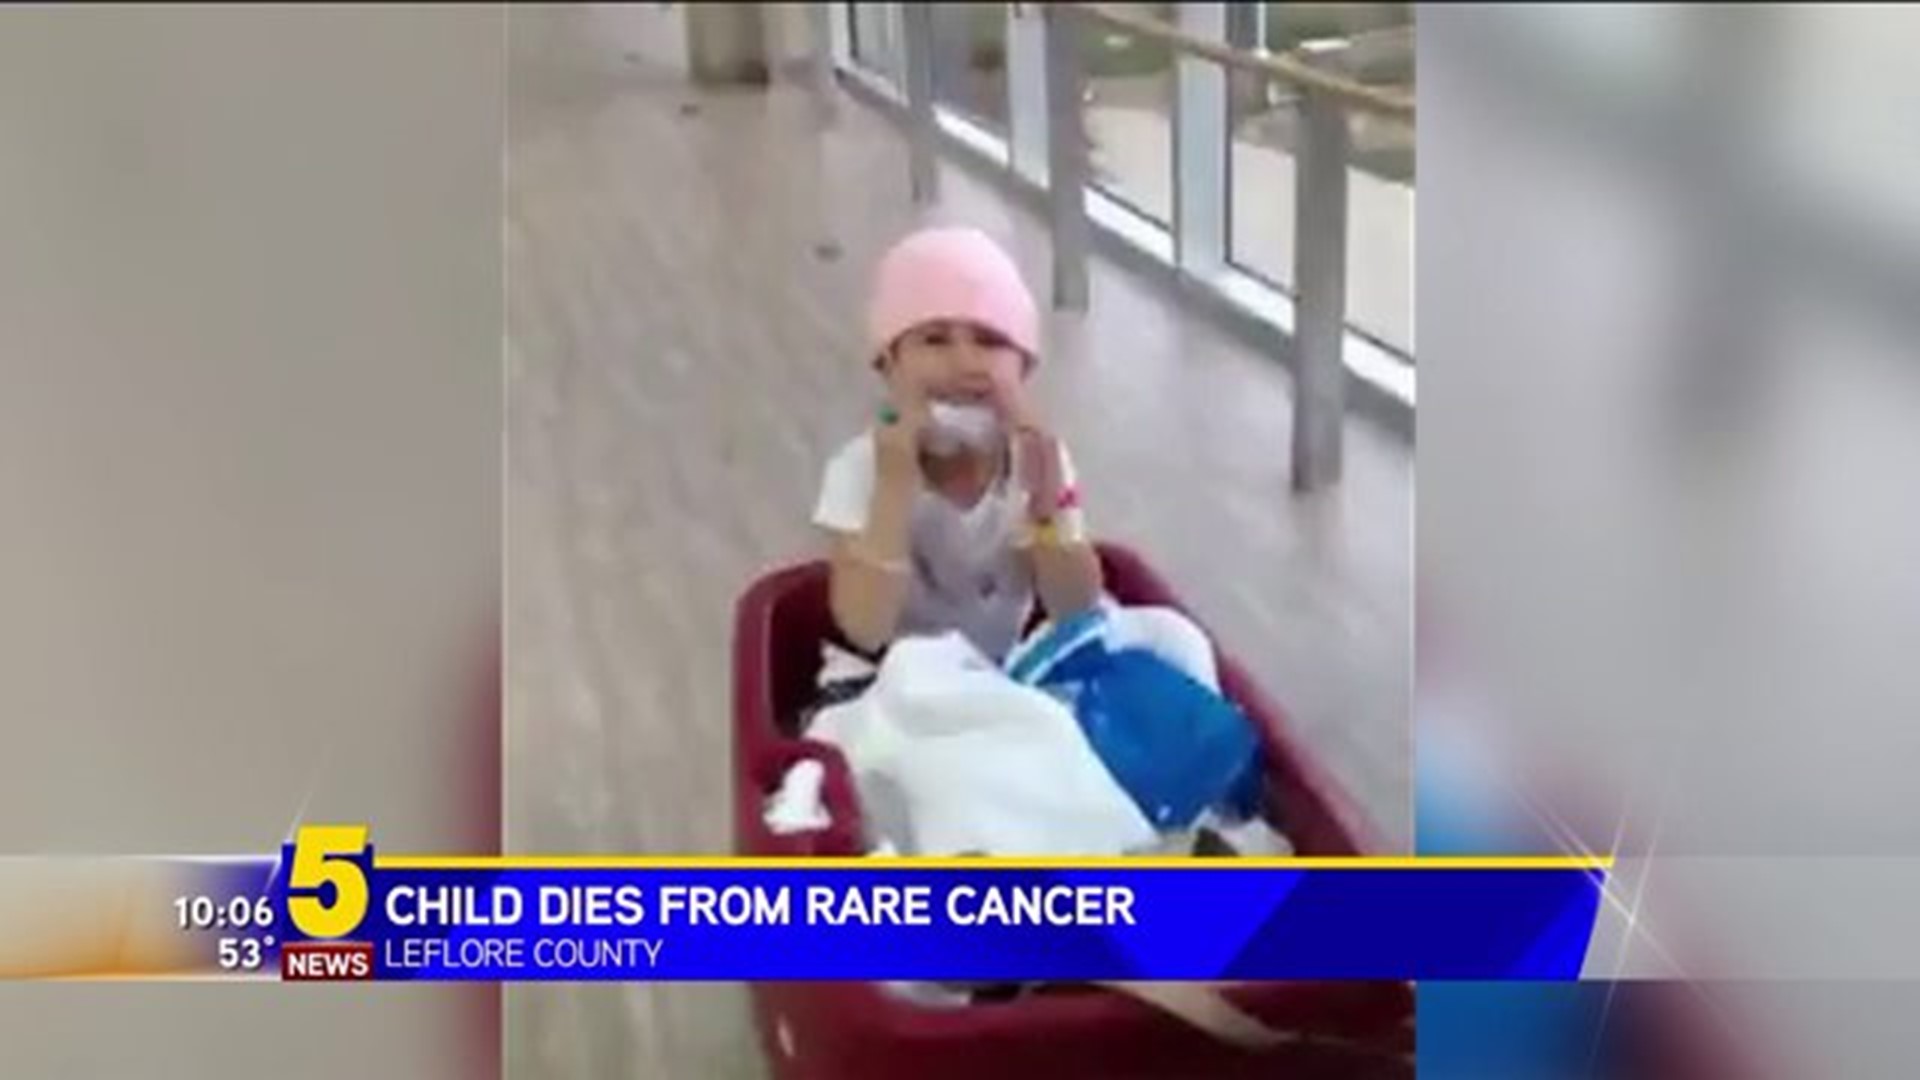 Child Dies From Rare Cancer